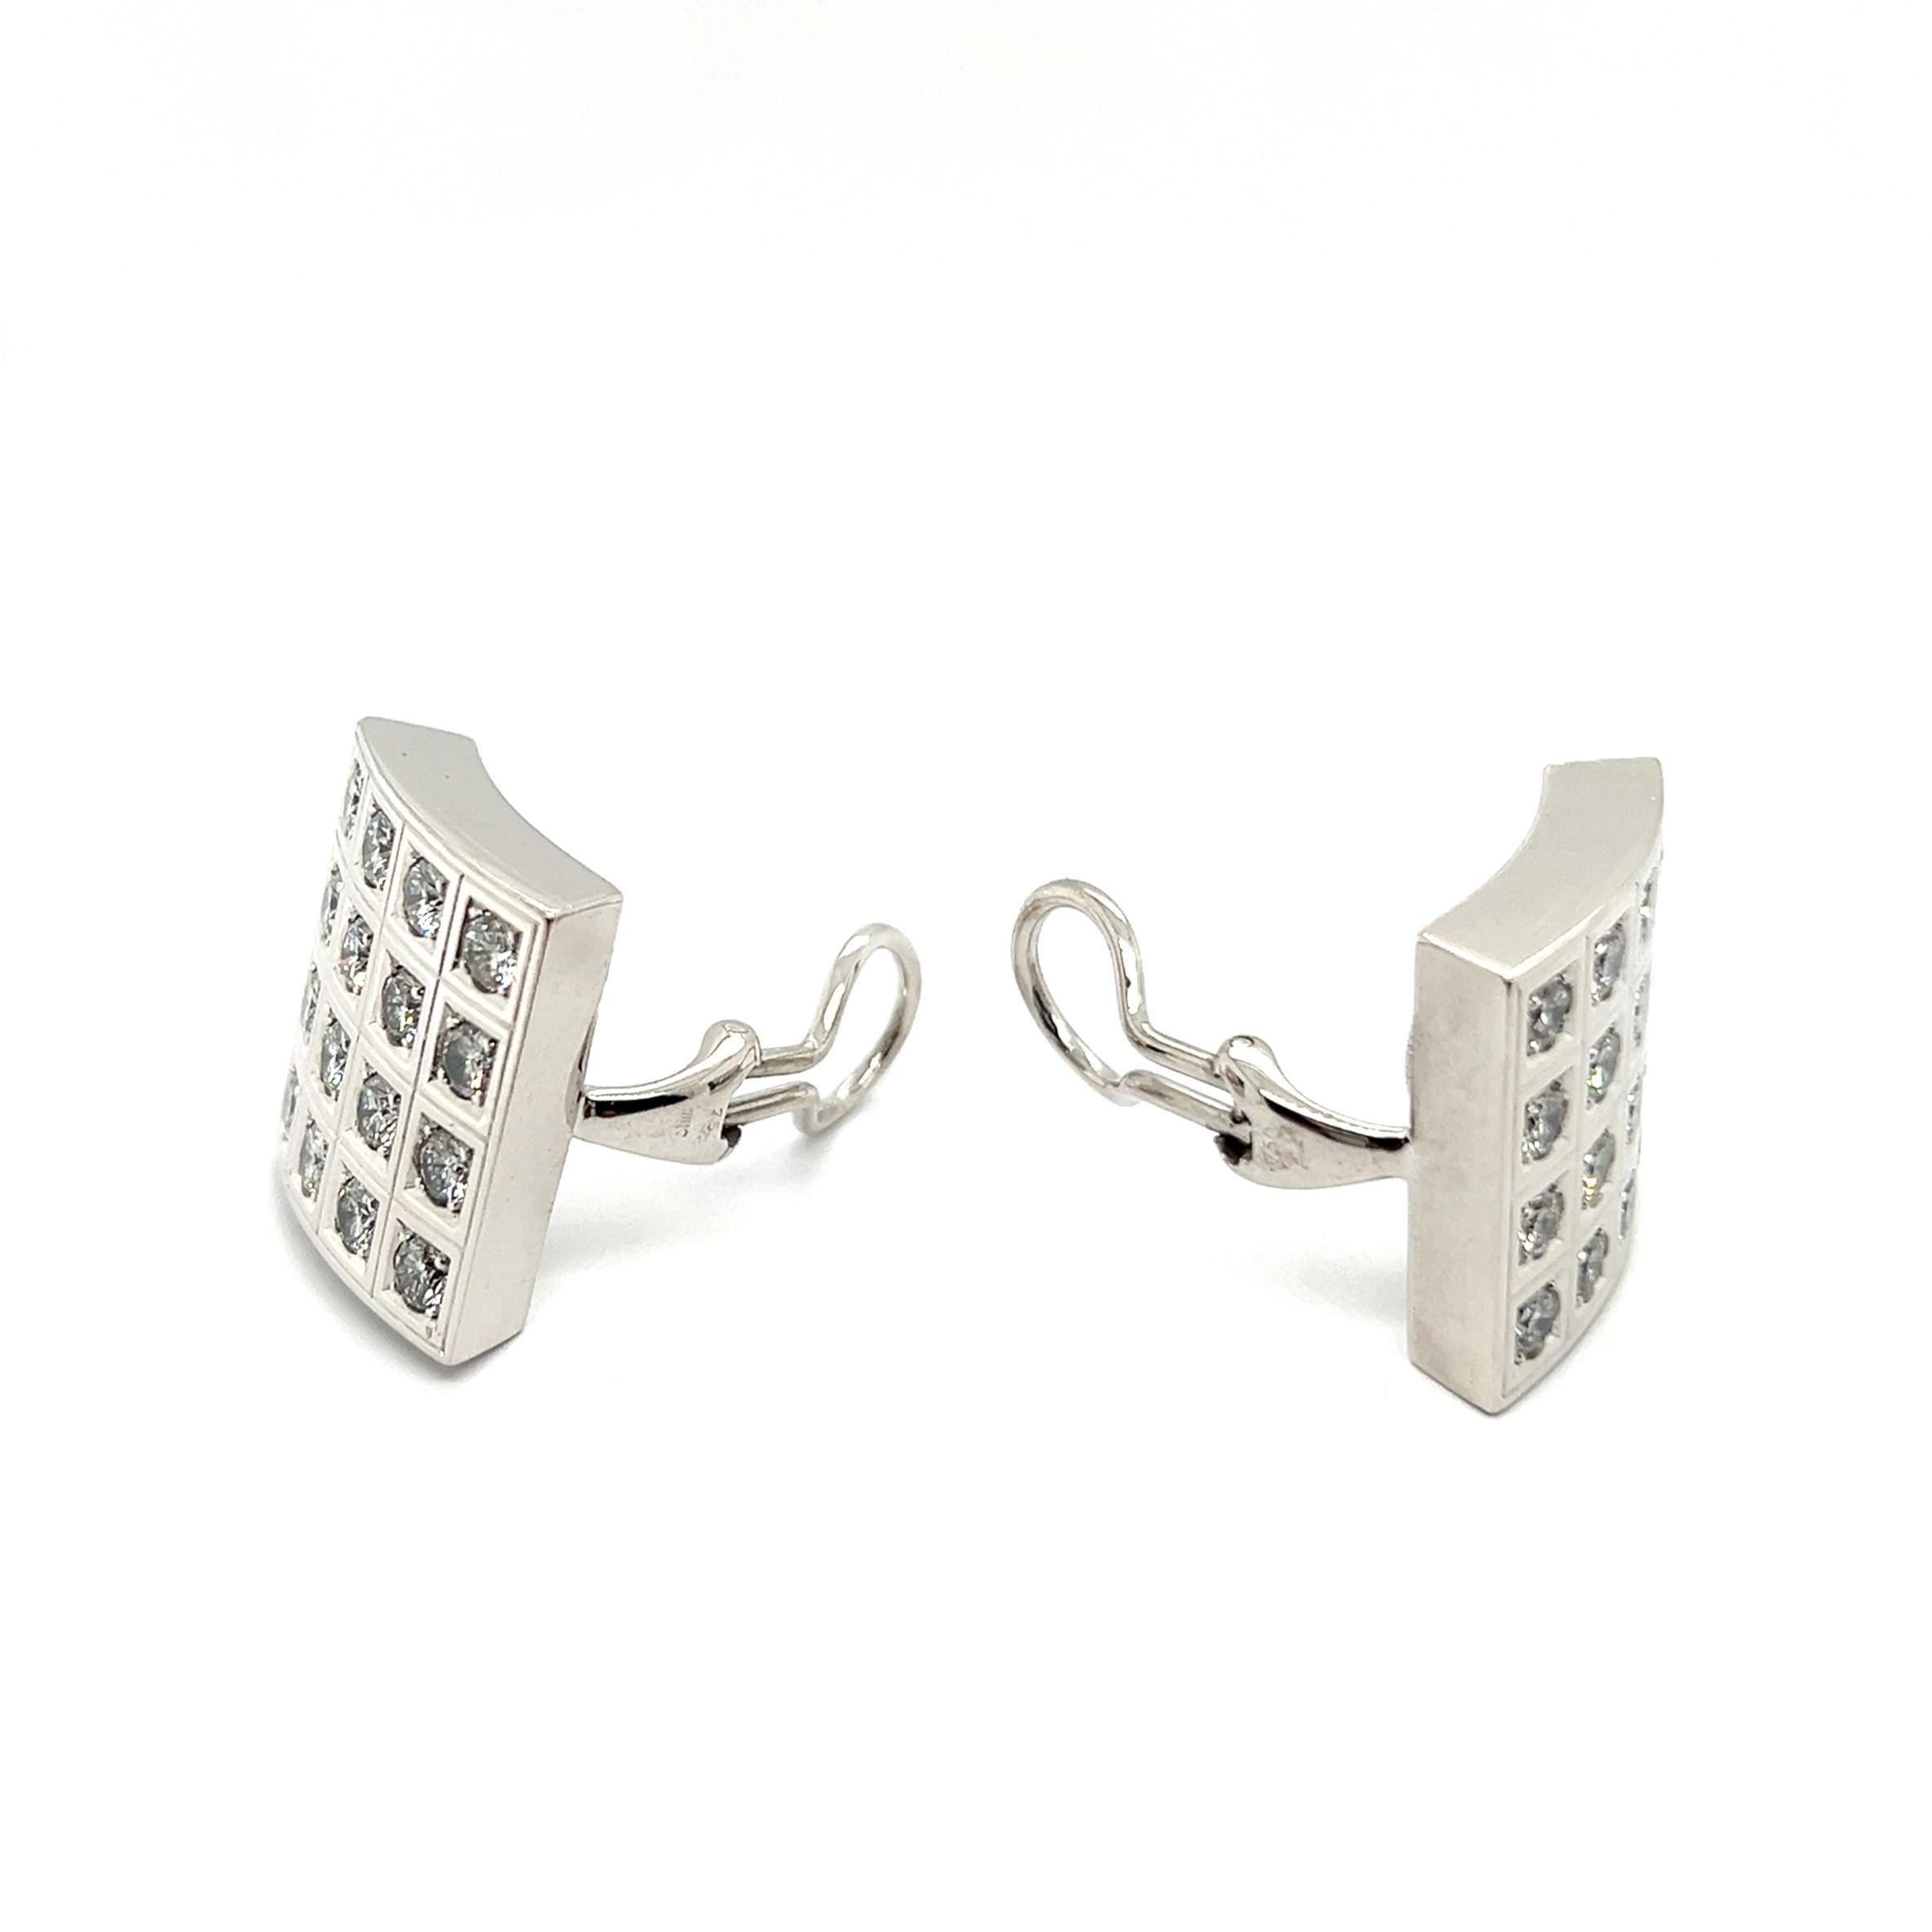  Bold Graphic Earrings with Diamonds in 18 Karat White Gold by Majo Fruithof For Sale 3